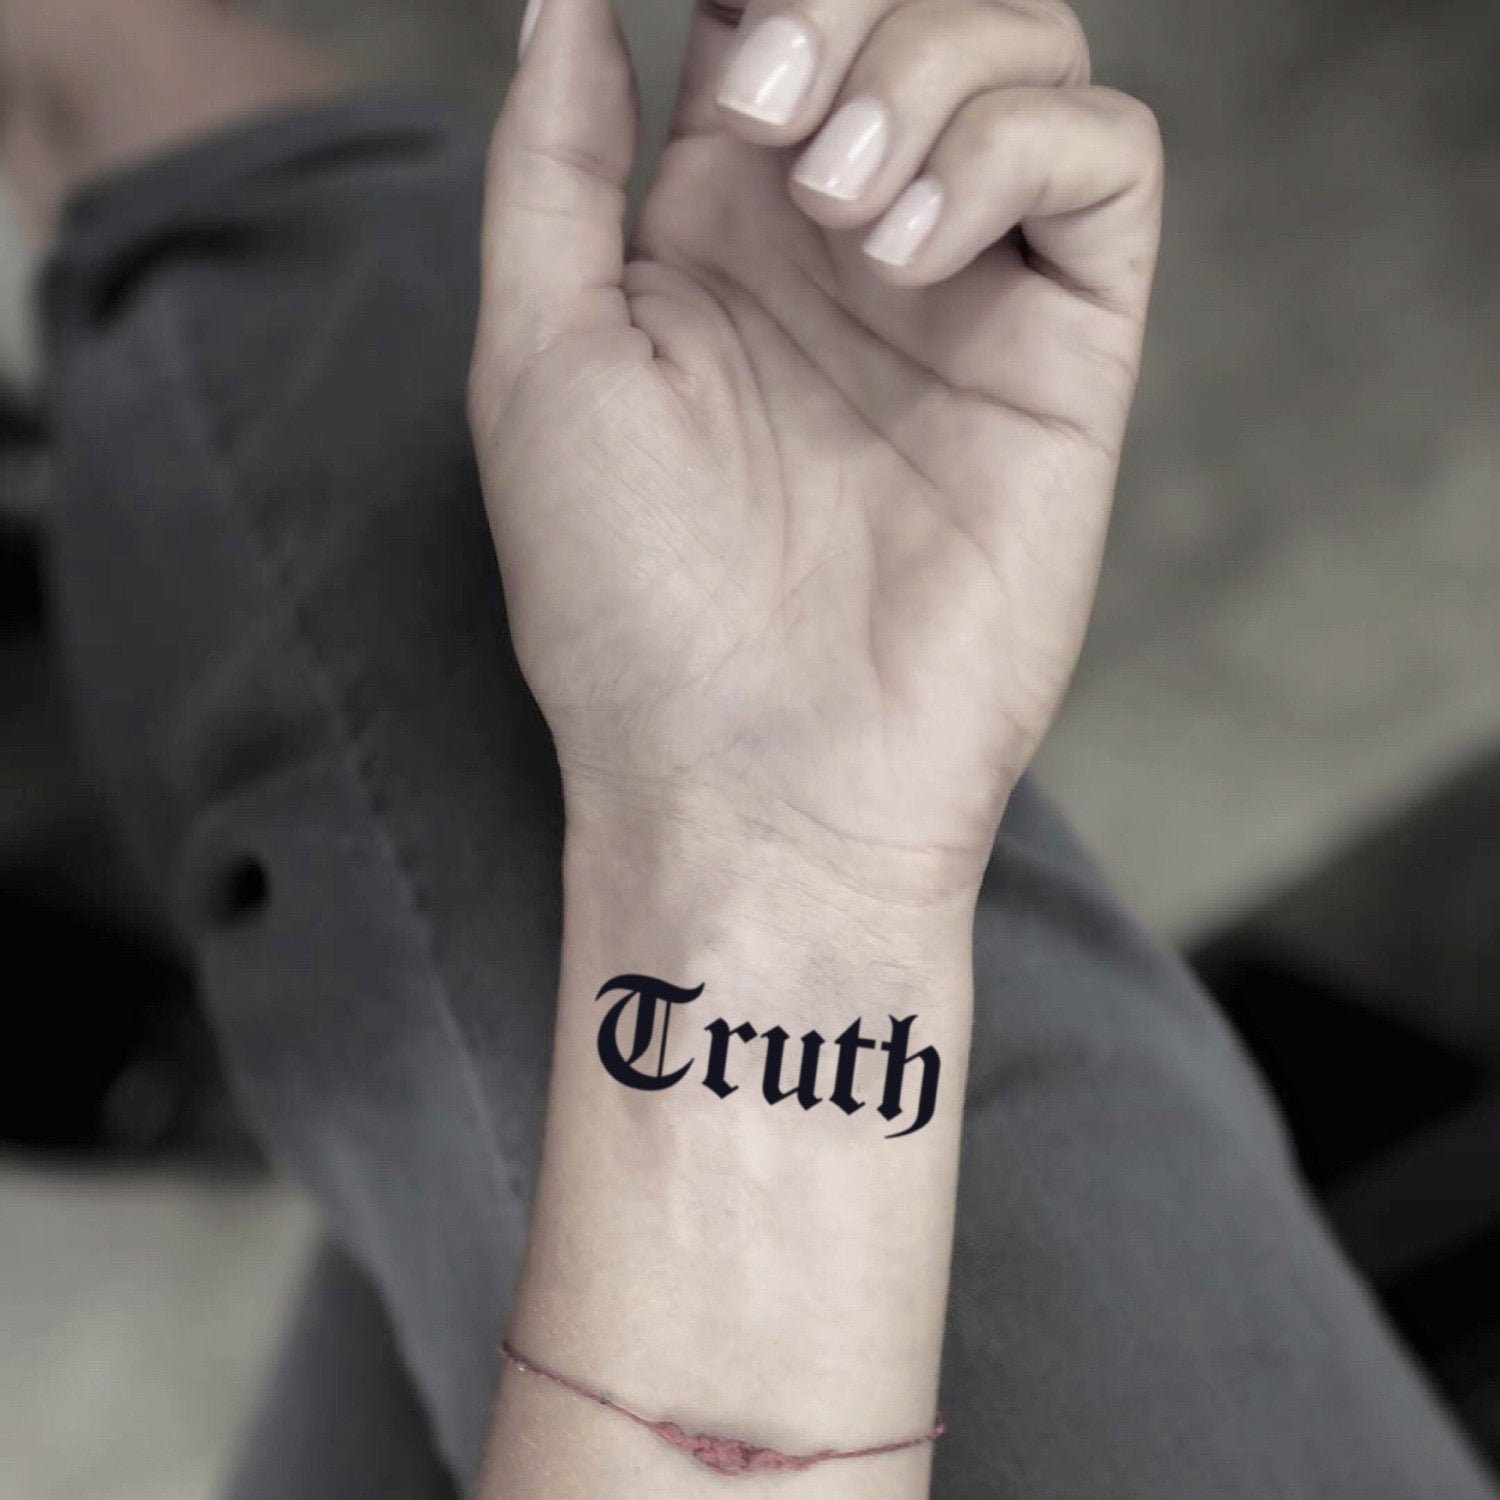 Merdi on Tumblr: New tattoo! The Sword of Truth from Terry Goodkind's Sword  of Truth book series!